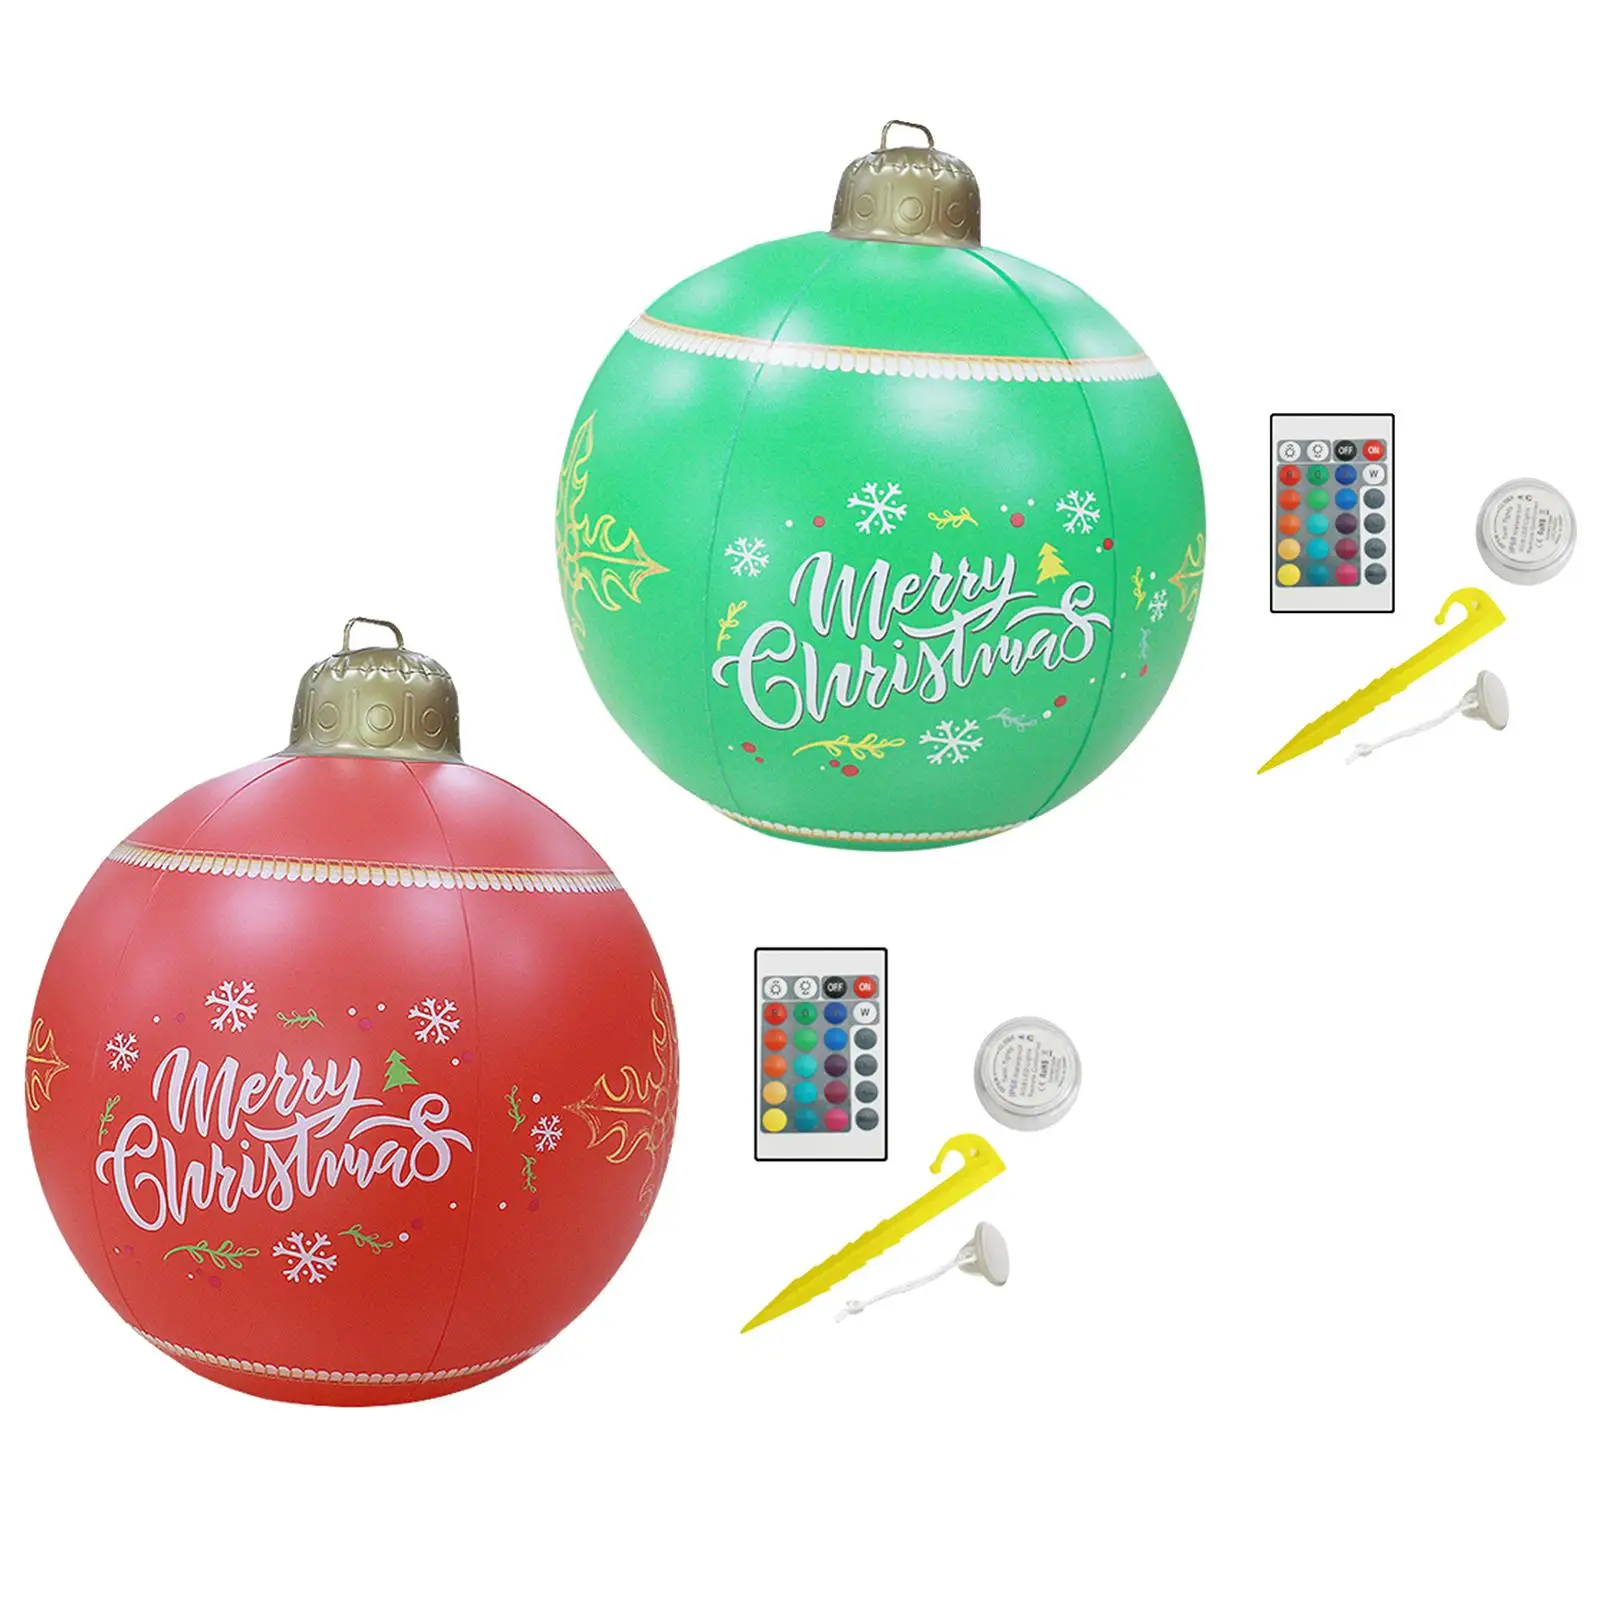 LED Christmas Inflatable Ball 16 Colors Adjustable PVC Hanging 60cm Remote Control Outdoor for Holiday Party New Year Lawn Yard